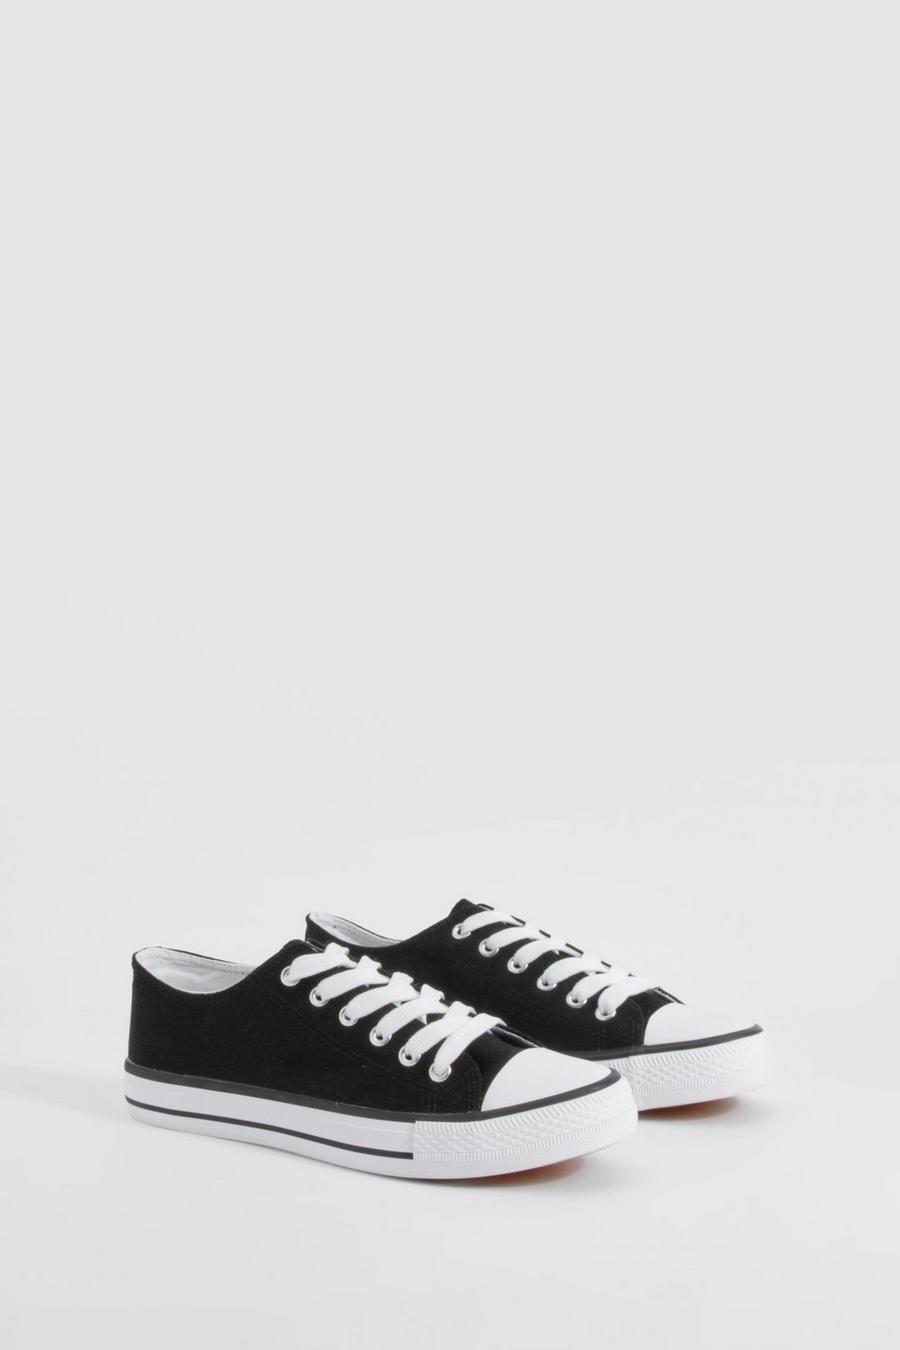 Black_white Low Top Lace Up Sneakers